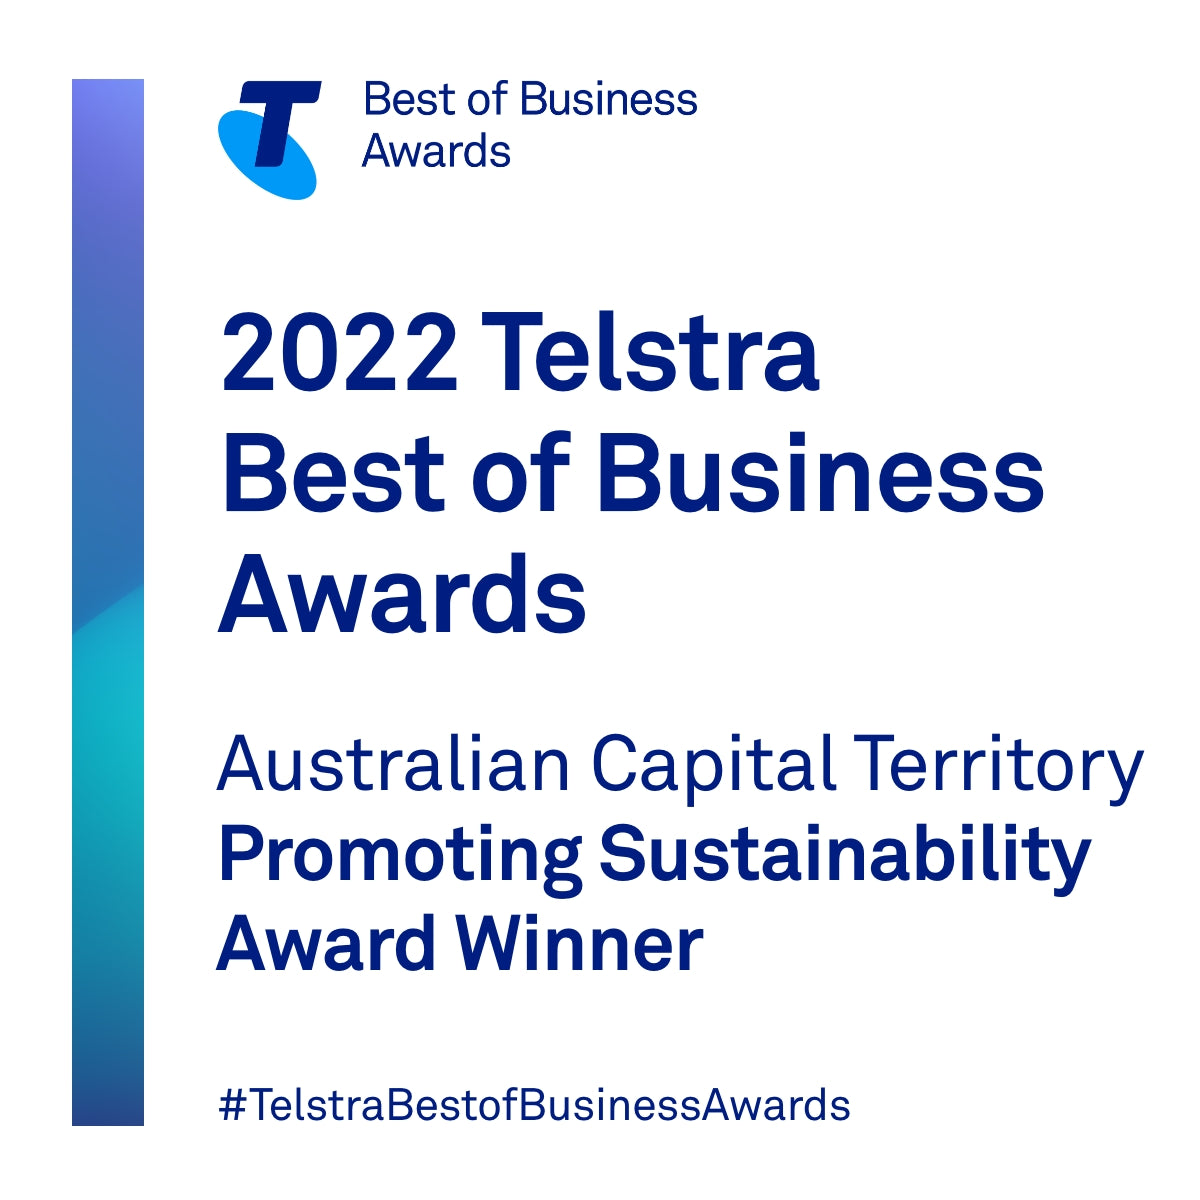 ACT Winner for Promoting Sustainability